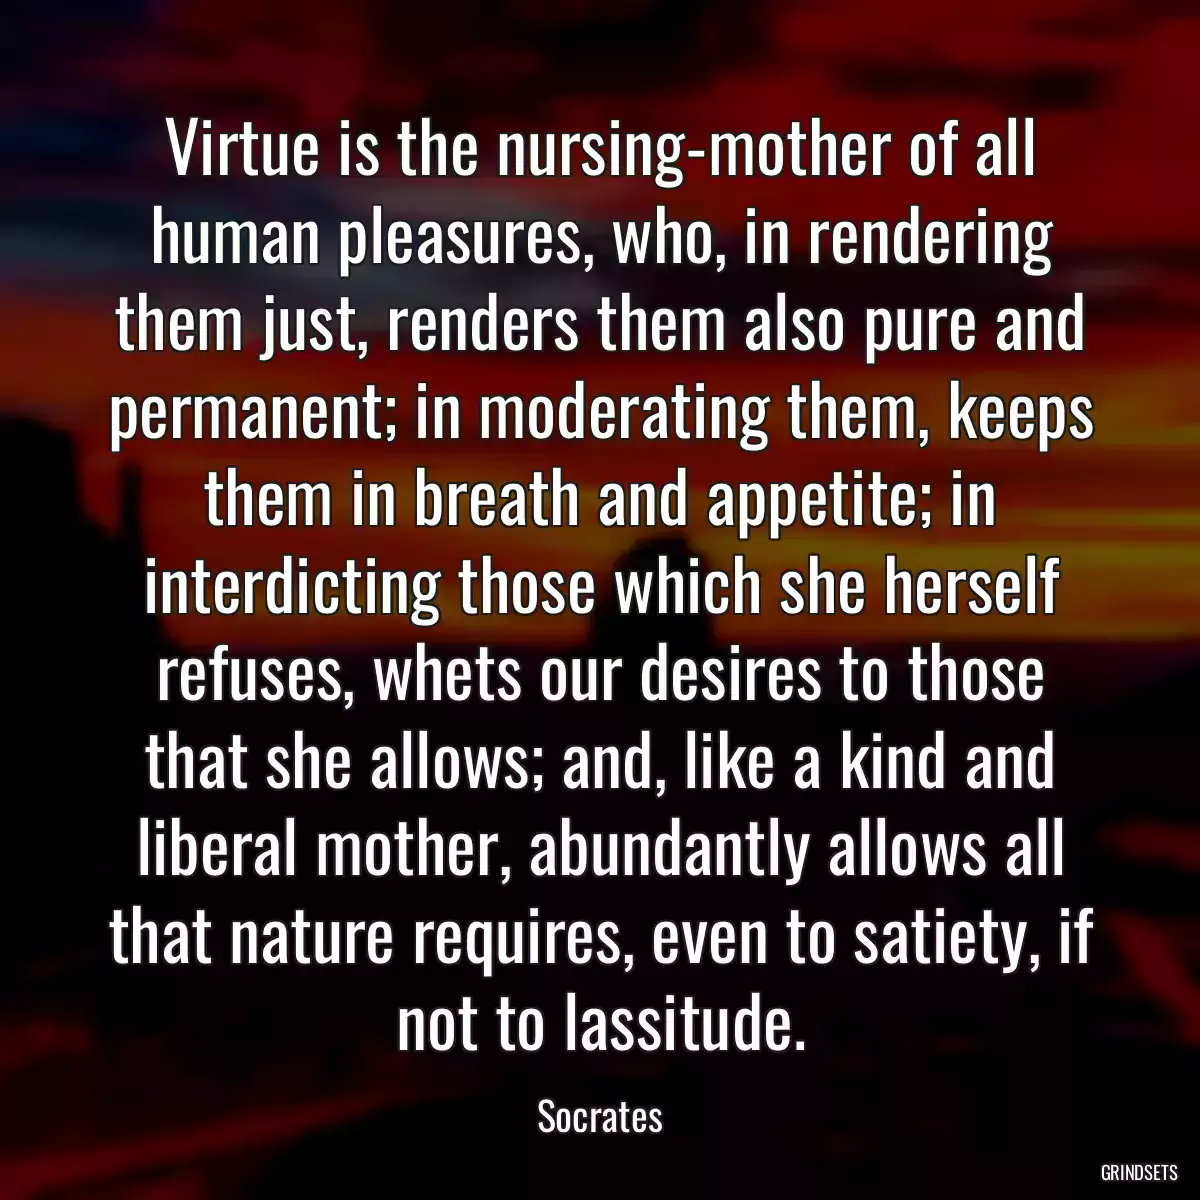 Virtue is the nursing-mother of all human pleasures, who, in rendering them just, renders them also pure and permanent; in moderating them, keeps them in breath and appetite; in interdicting those which she herself refuses, whets our desires to those that she allows; and, like a kind and liberal mother, abundantly allows all that nature requires, even to satiety, if not to lassitude.